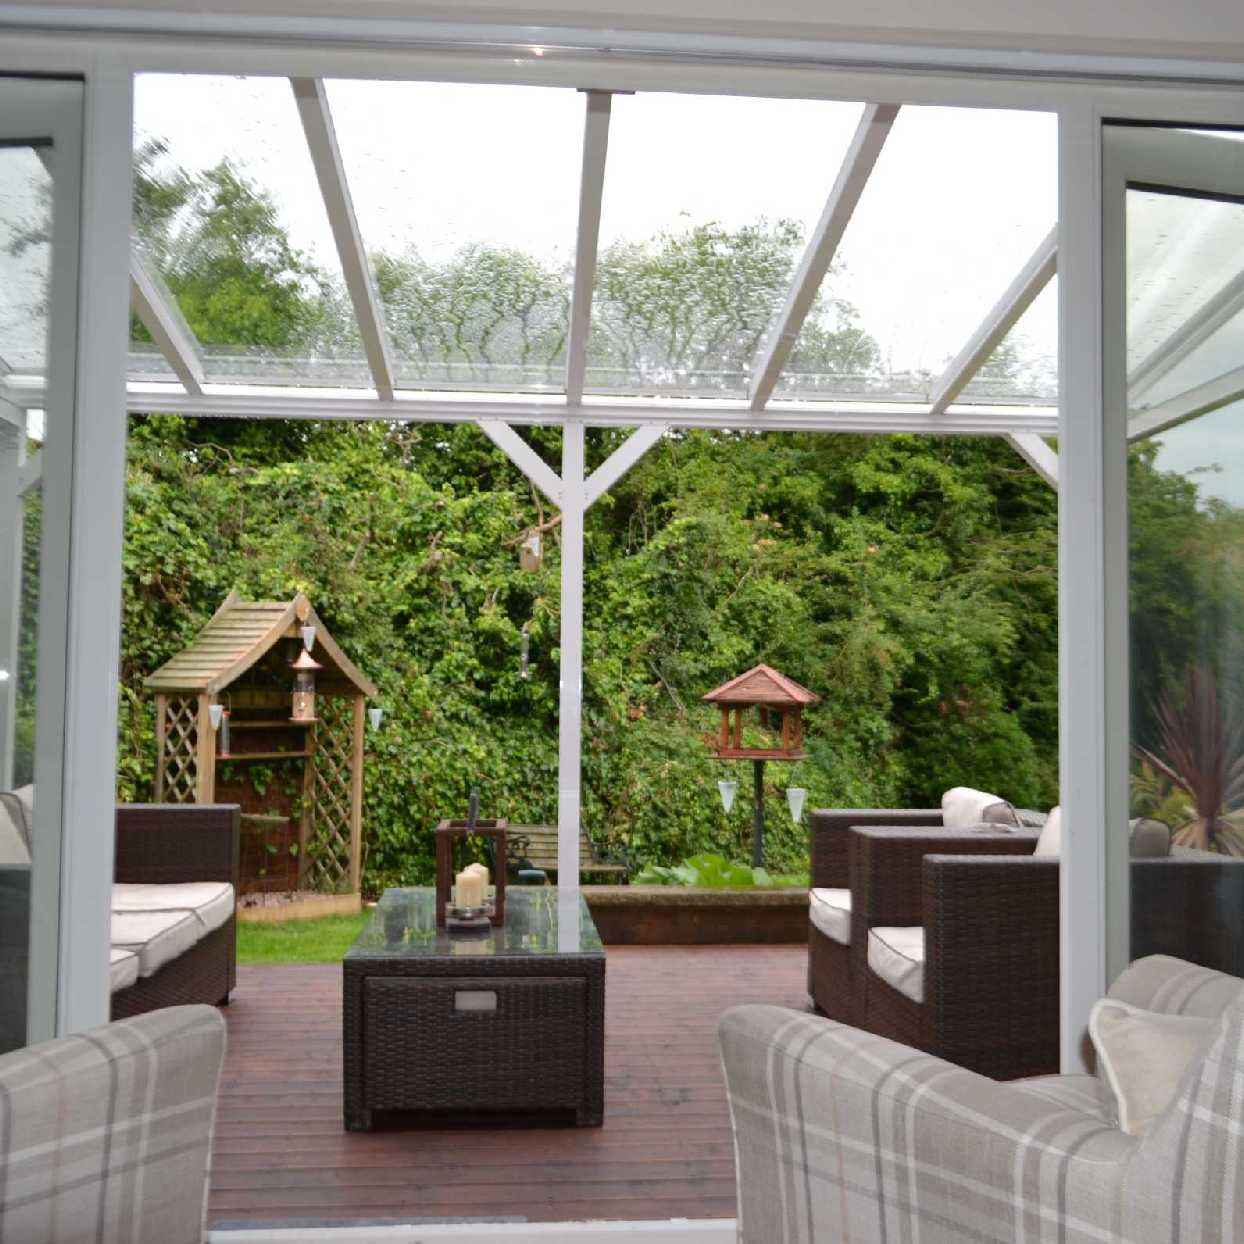 Great selection of Omega Smart Lean-To Canopy, White UNGLAZED for 6mm Glazing - 9.8m (W) x 1.5m (P), (5) Supporting Posts